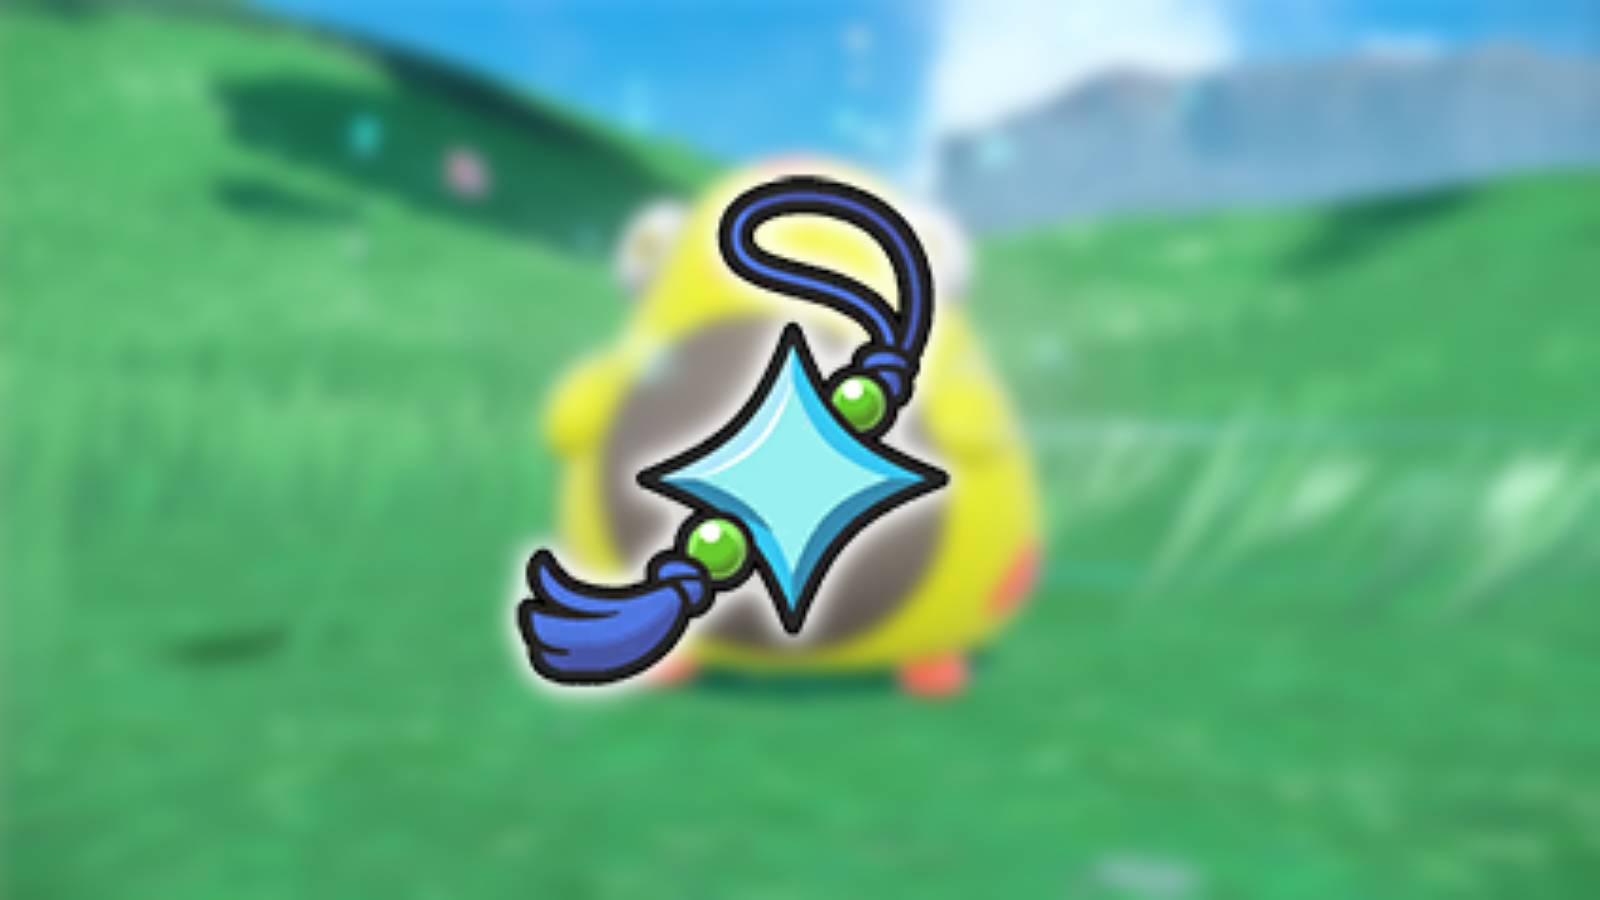 The Pokemon Scarlet and VIolet shiny charm is shown in the middle of the image